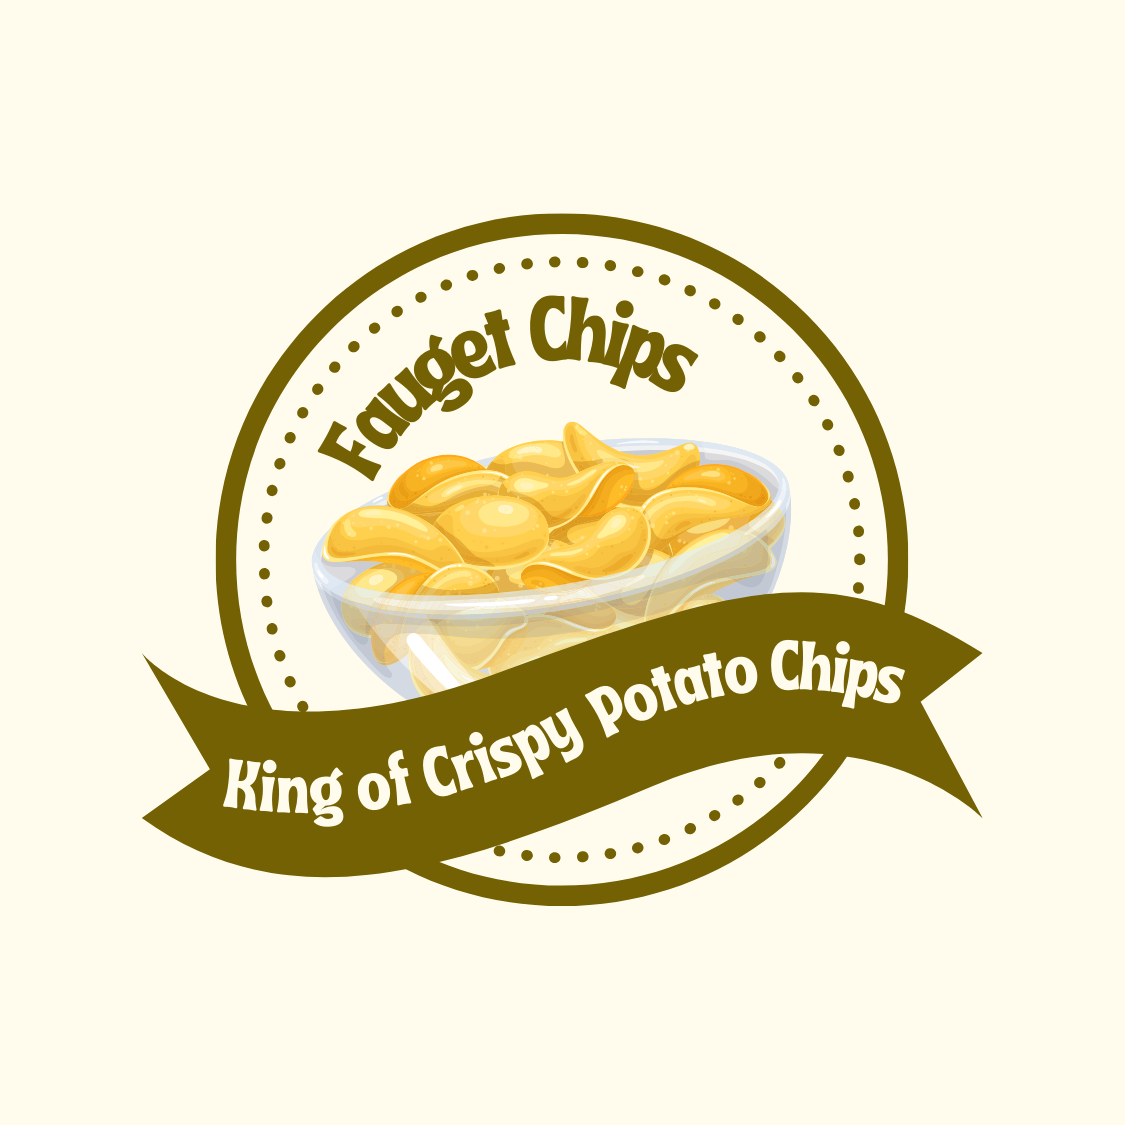 Terrell's Potato Chips | Syracuse's Finest for 70 Years